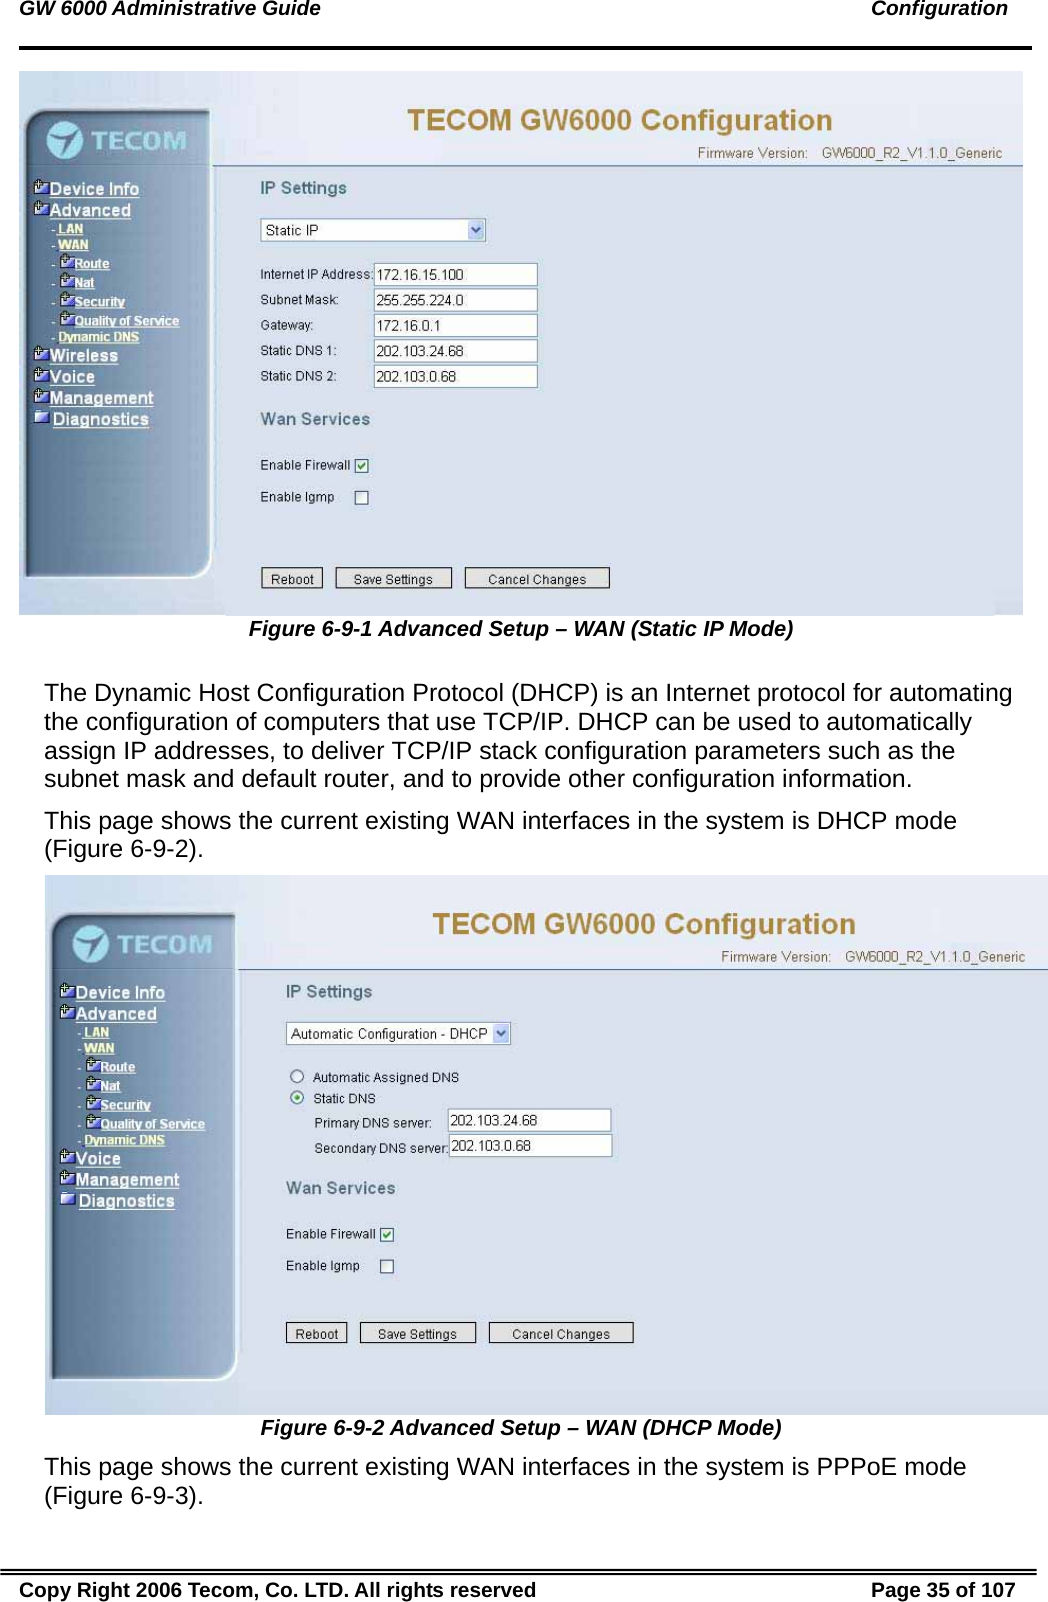 GW 6000 Administrative Guide                                                                                               Configuration  Figure 6-9-1 Advanced Setup – WAN (Static IP Mode)  The Dynamic Host Configuration Protocol (DHCP) is an Internet protocol for automating the configuration of computers that use TCP/IP. DHCP can be used to automatically assign IP addresses, to deliver TCP/IP stack configuration parameters such as the subnet mask and default router, and to provide other configuration information. This page shows the current existing WAN interfaces in the system is DHCP mode (Figure 6-9-2).  Figure 6-9-2 Advanced Setup – WAN (DHCP Mode) This page shows the current existing WAN interfaces in the system is PPPoE mode (Figure 6-9-3). Copy Right 2006 Tecom, Co. LTD. All rights reserved  Page 35 of 107 